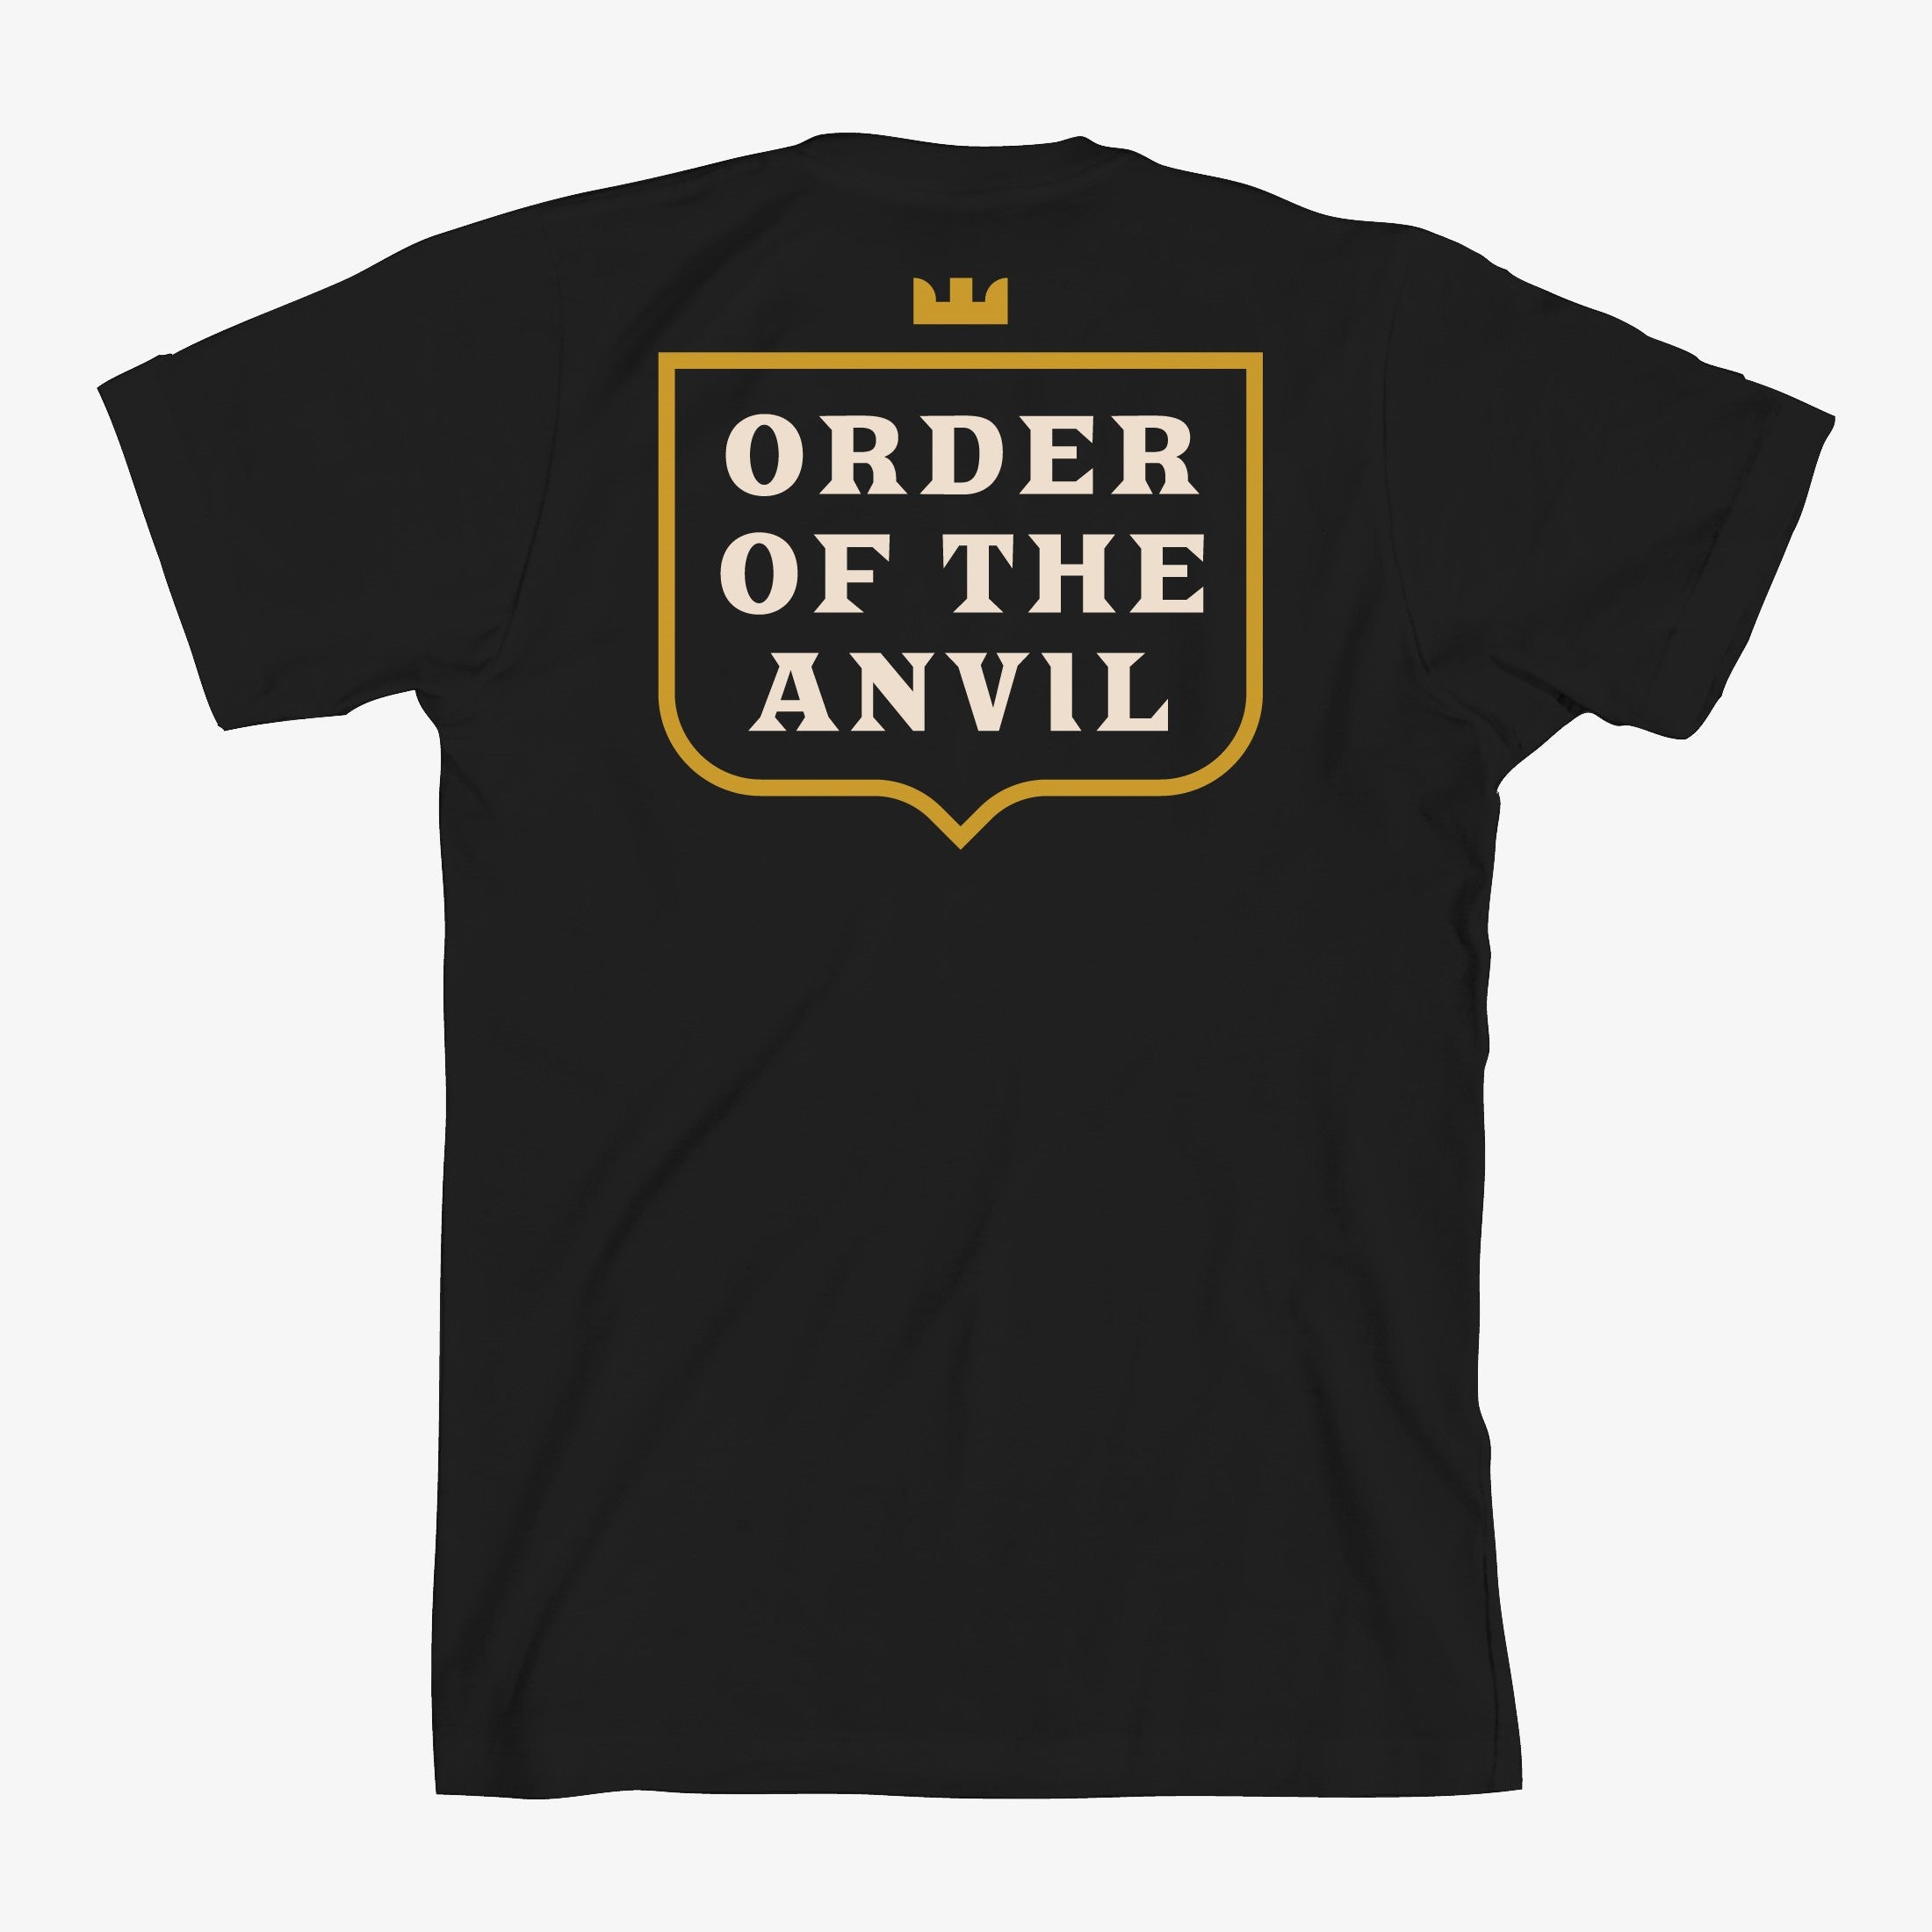 Order of the Anvil Tee - Shield - AleSmith Brewing Co.